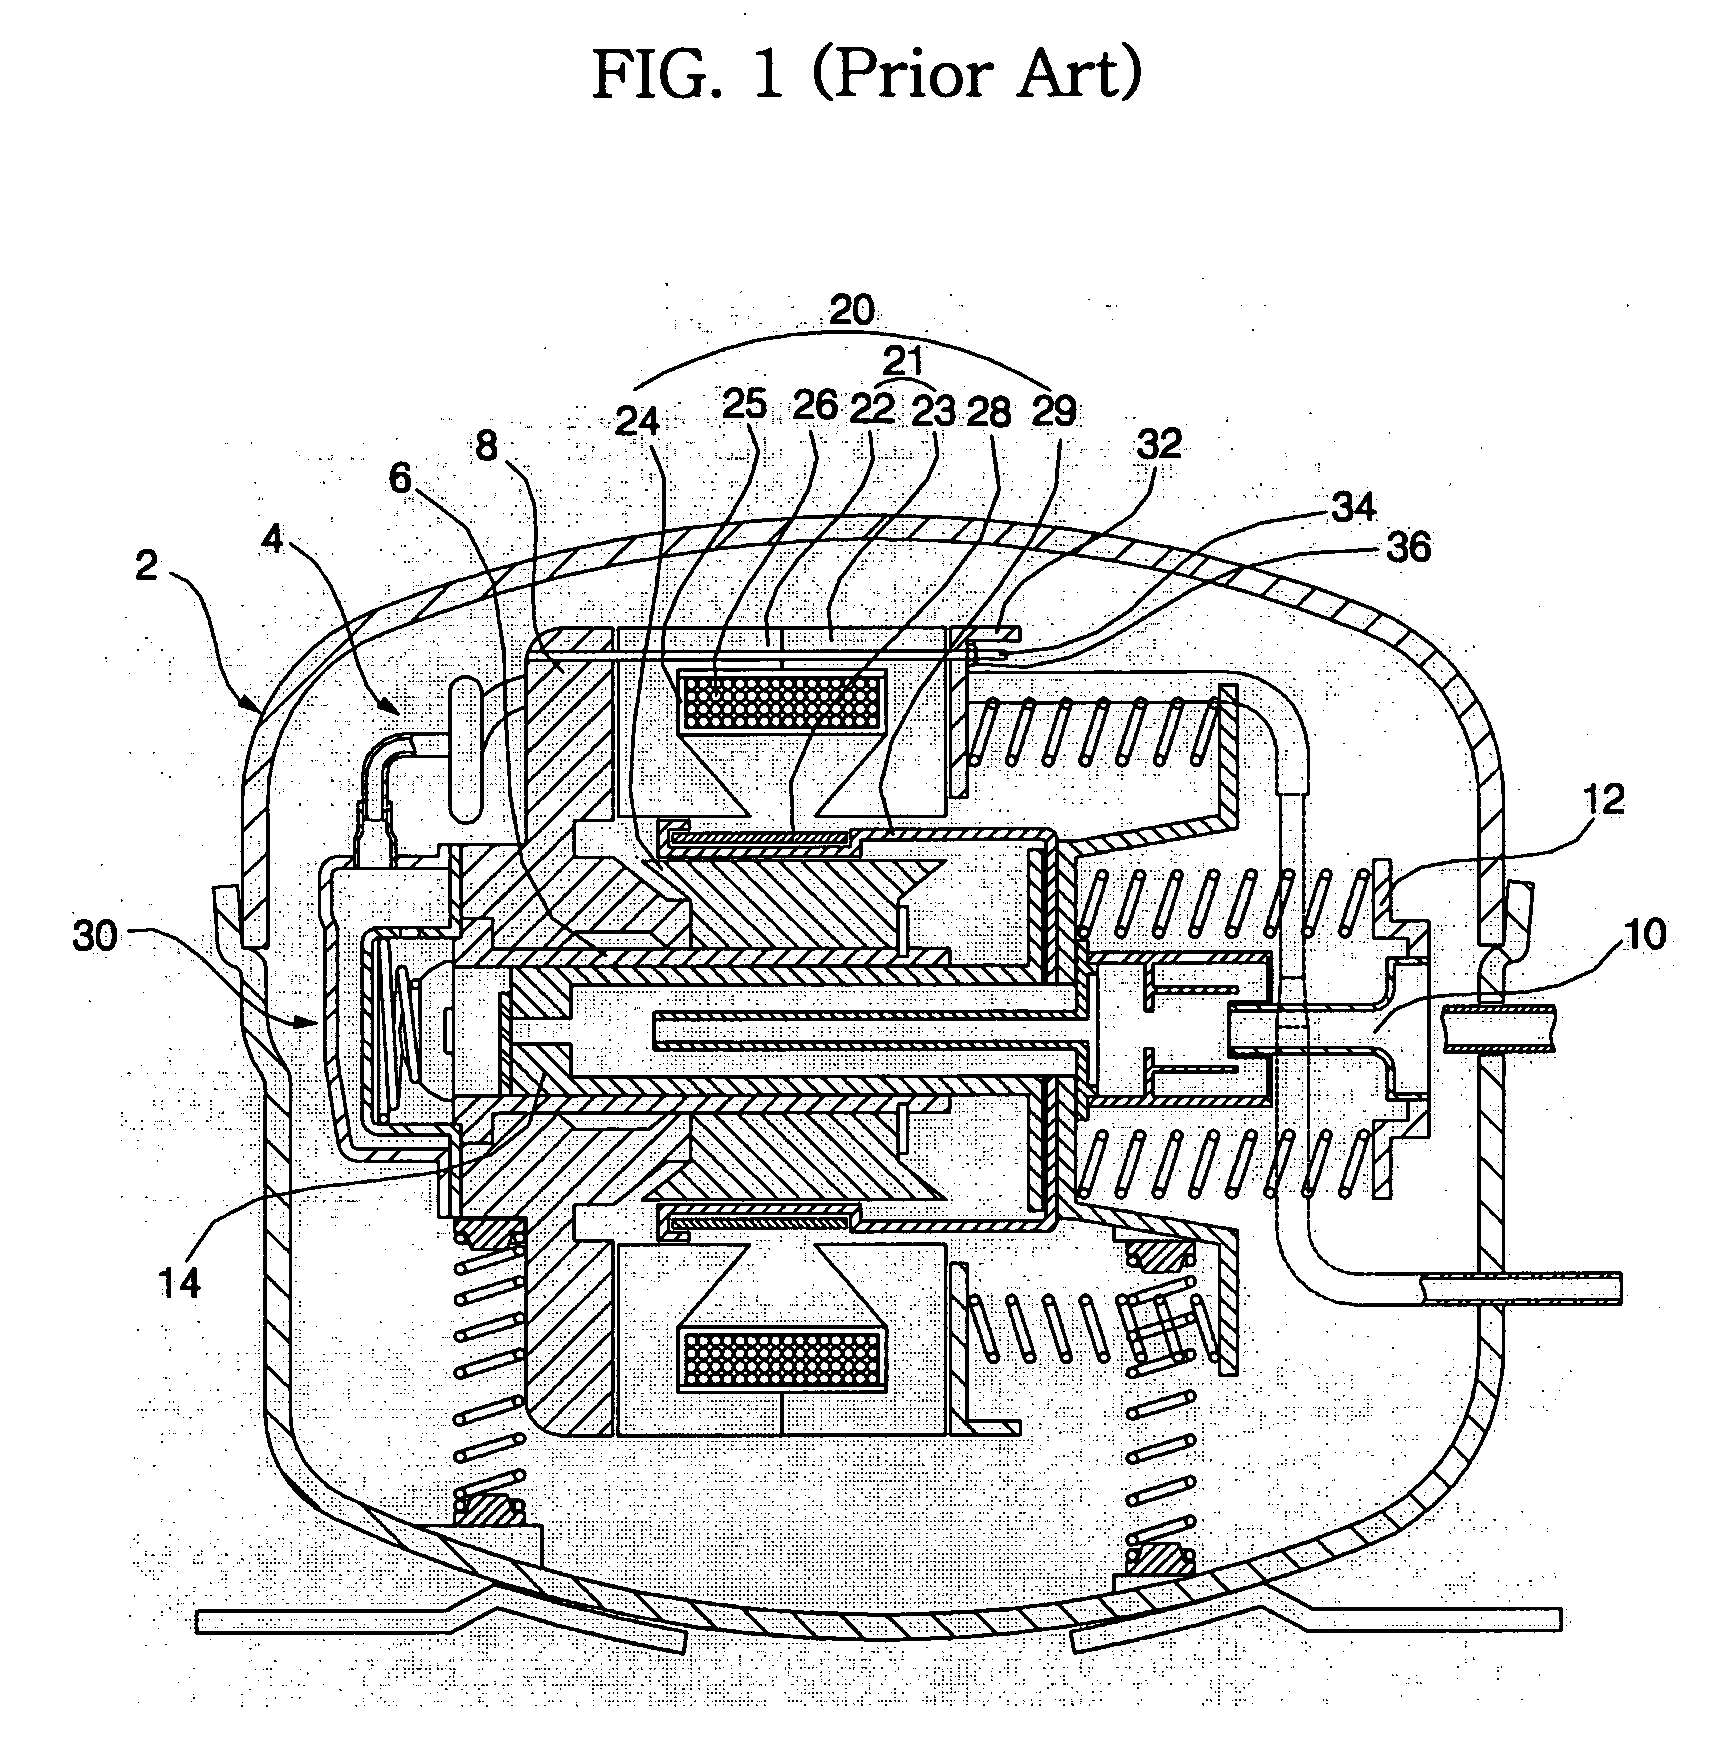 Outer core assembly structure of linear motor